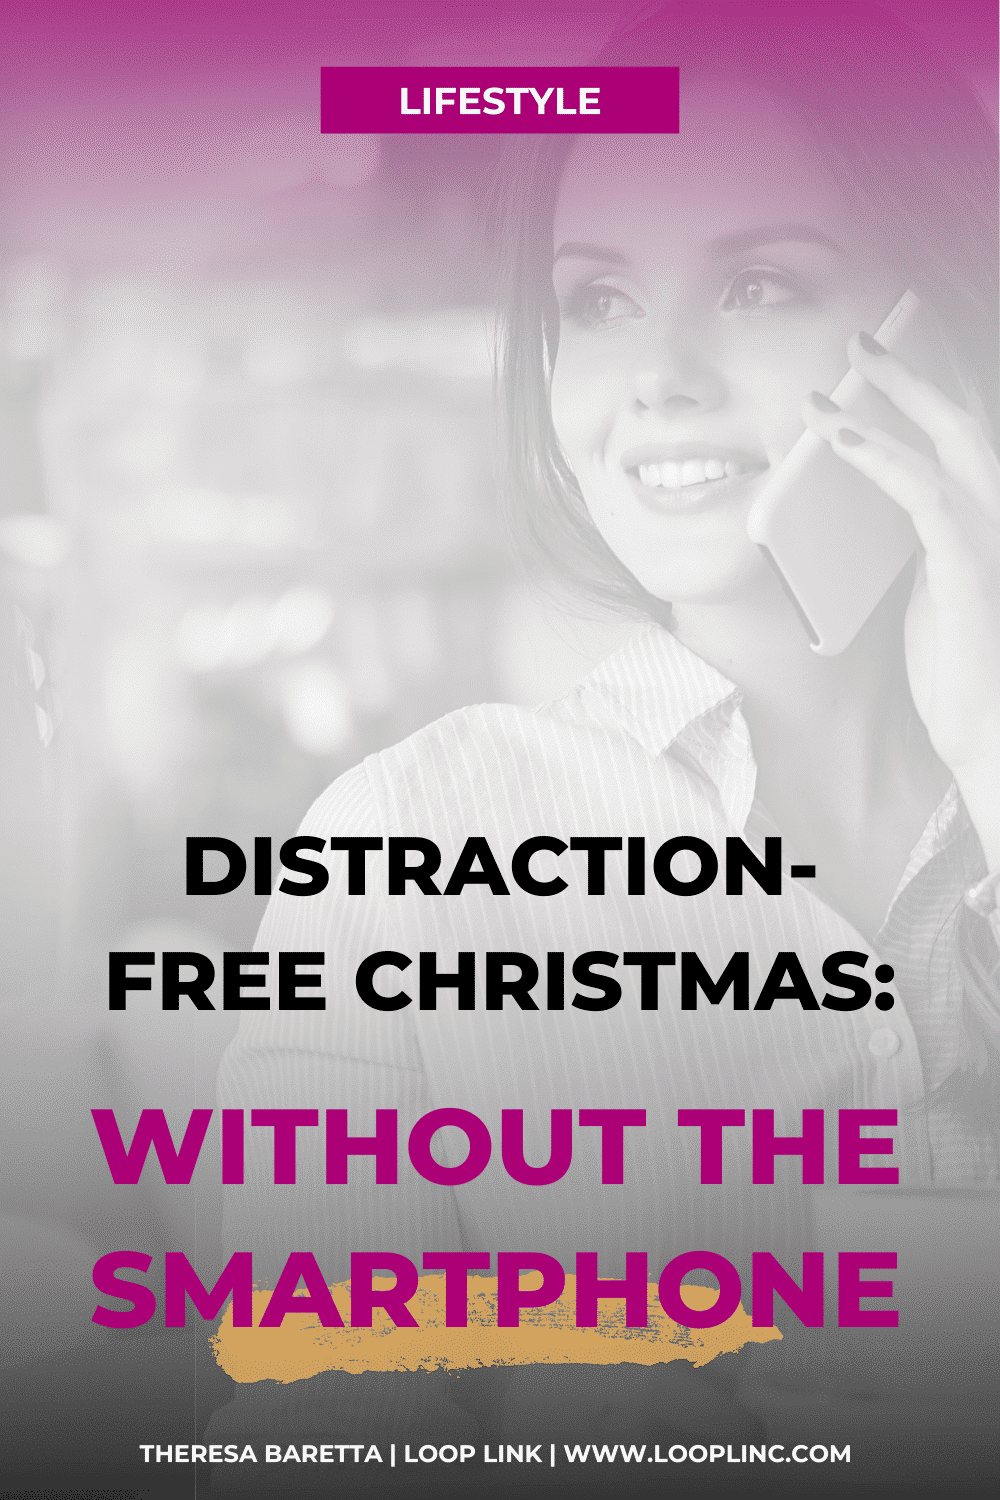 Distraction-free Christmas without Smartphones